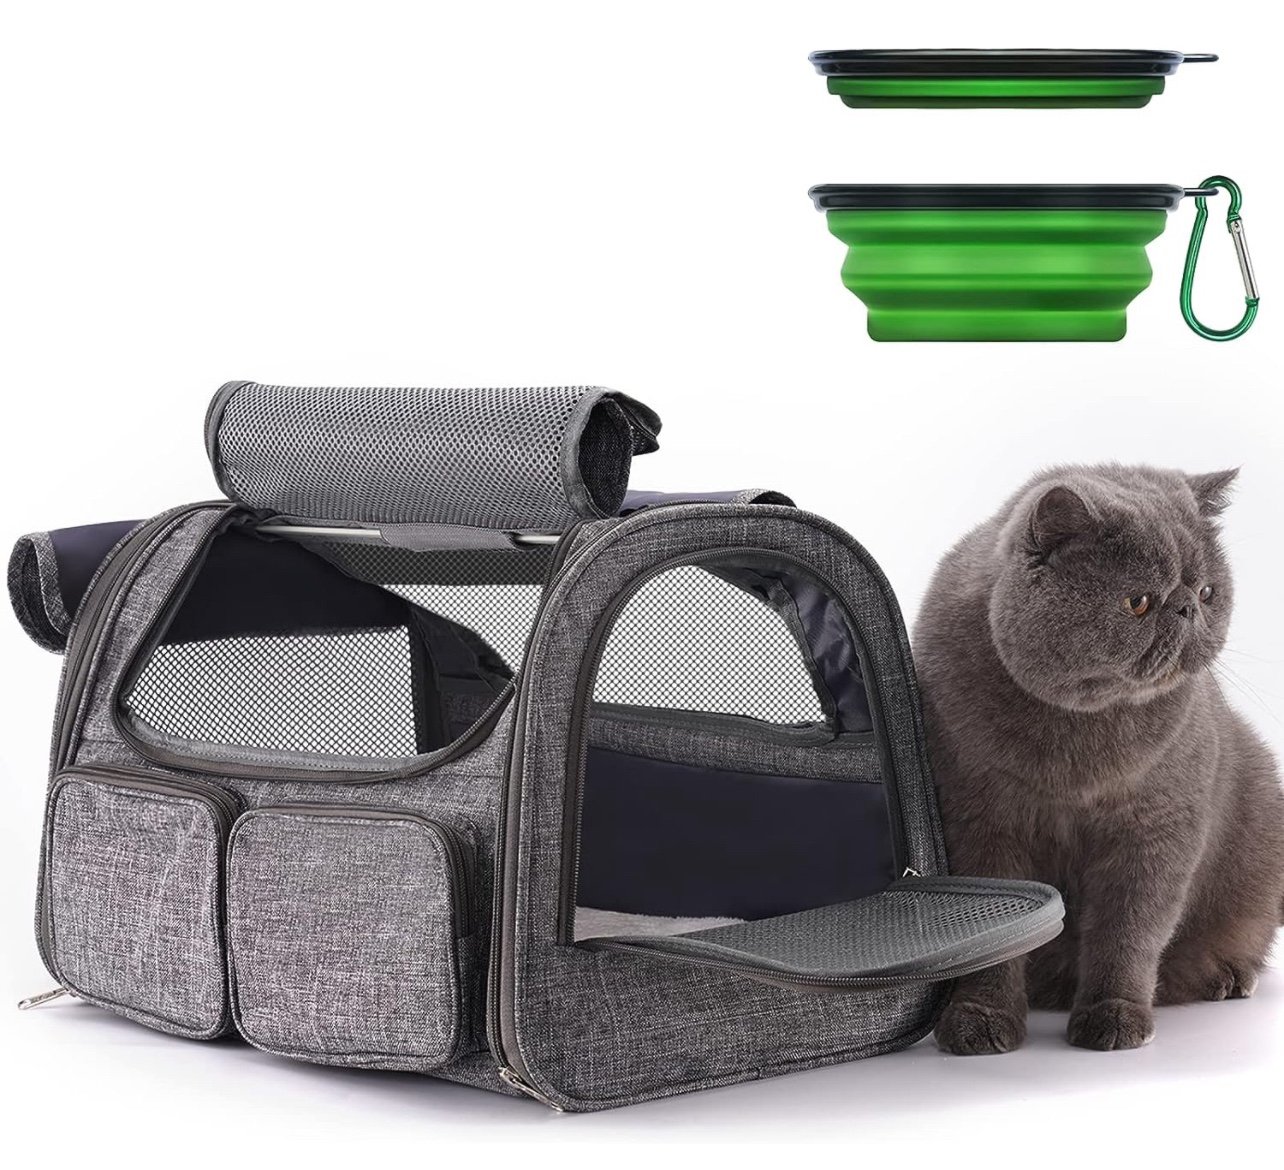 Soft Sided Pet Carrier Travel Bag Ventilated Comfortable Shade Protect Pets 6FwMYHs3C